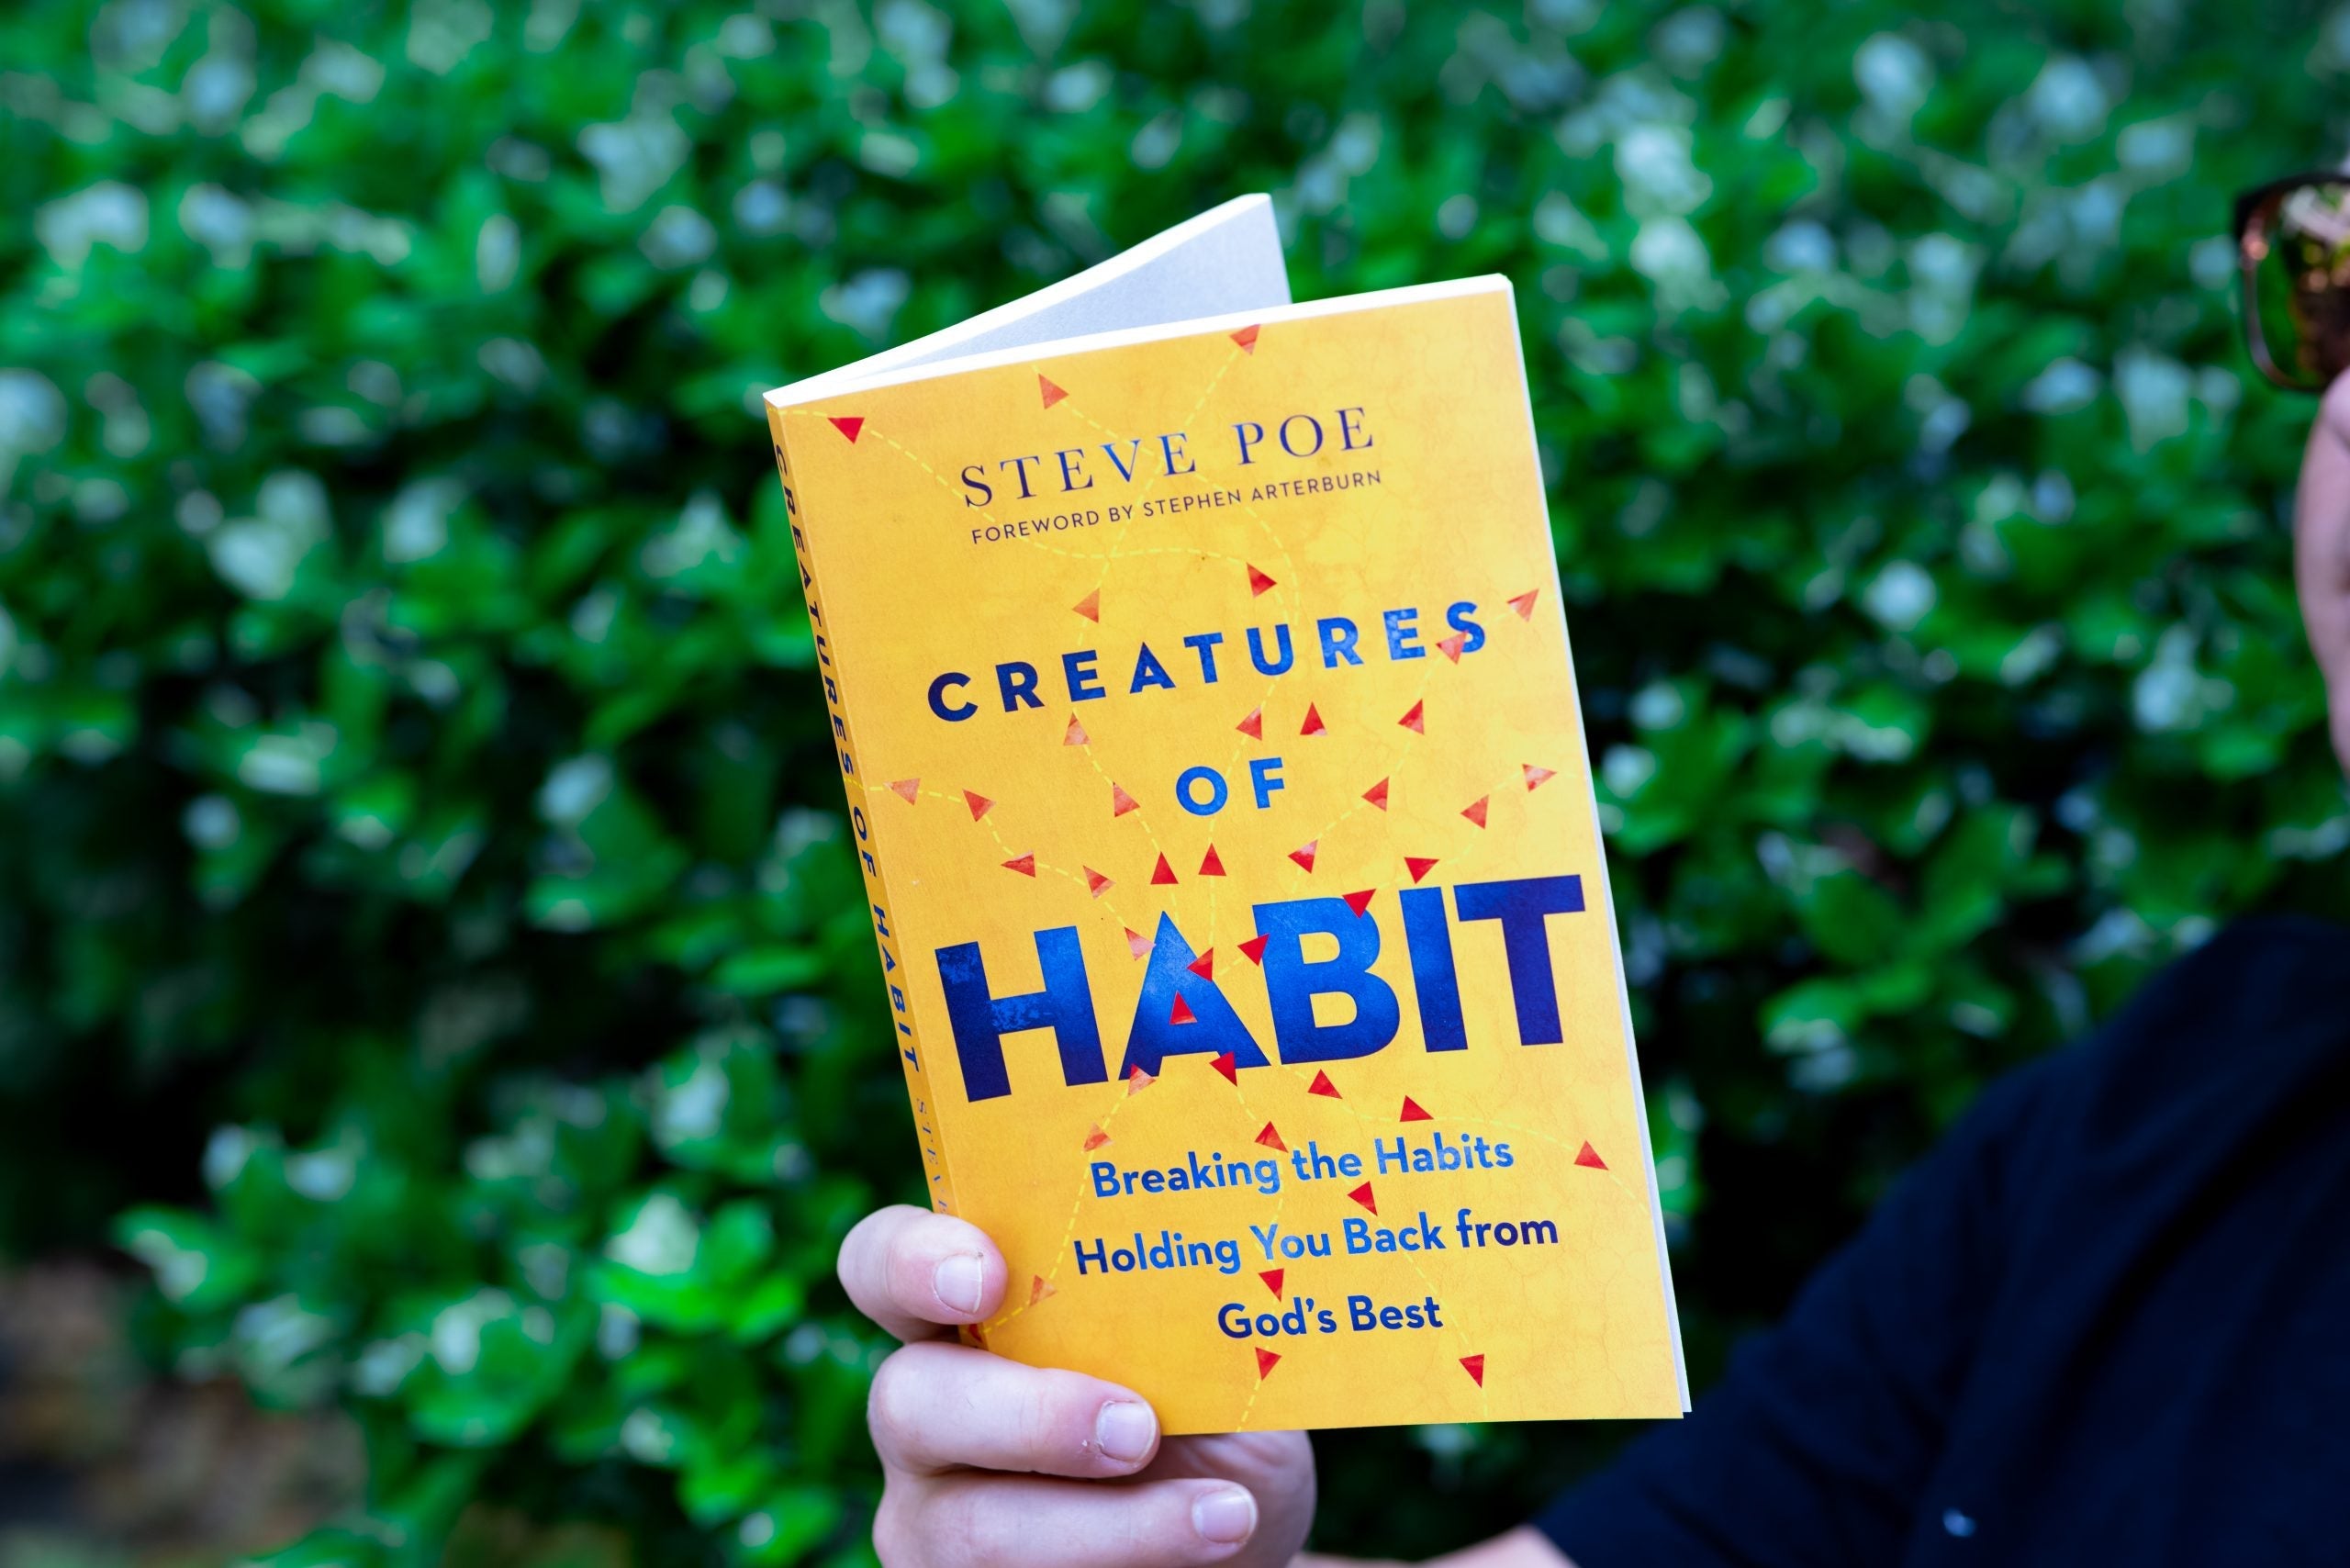 Creatures of Habit: Breaking the Habits Holding You Back from God's Best by Steve Poe